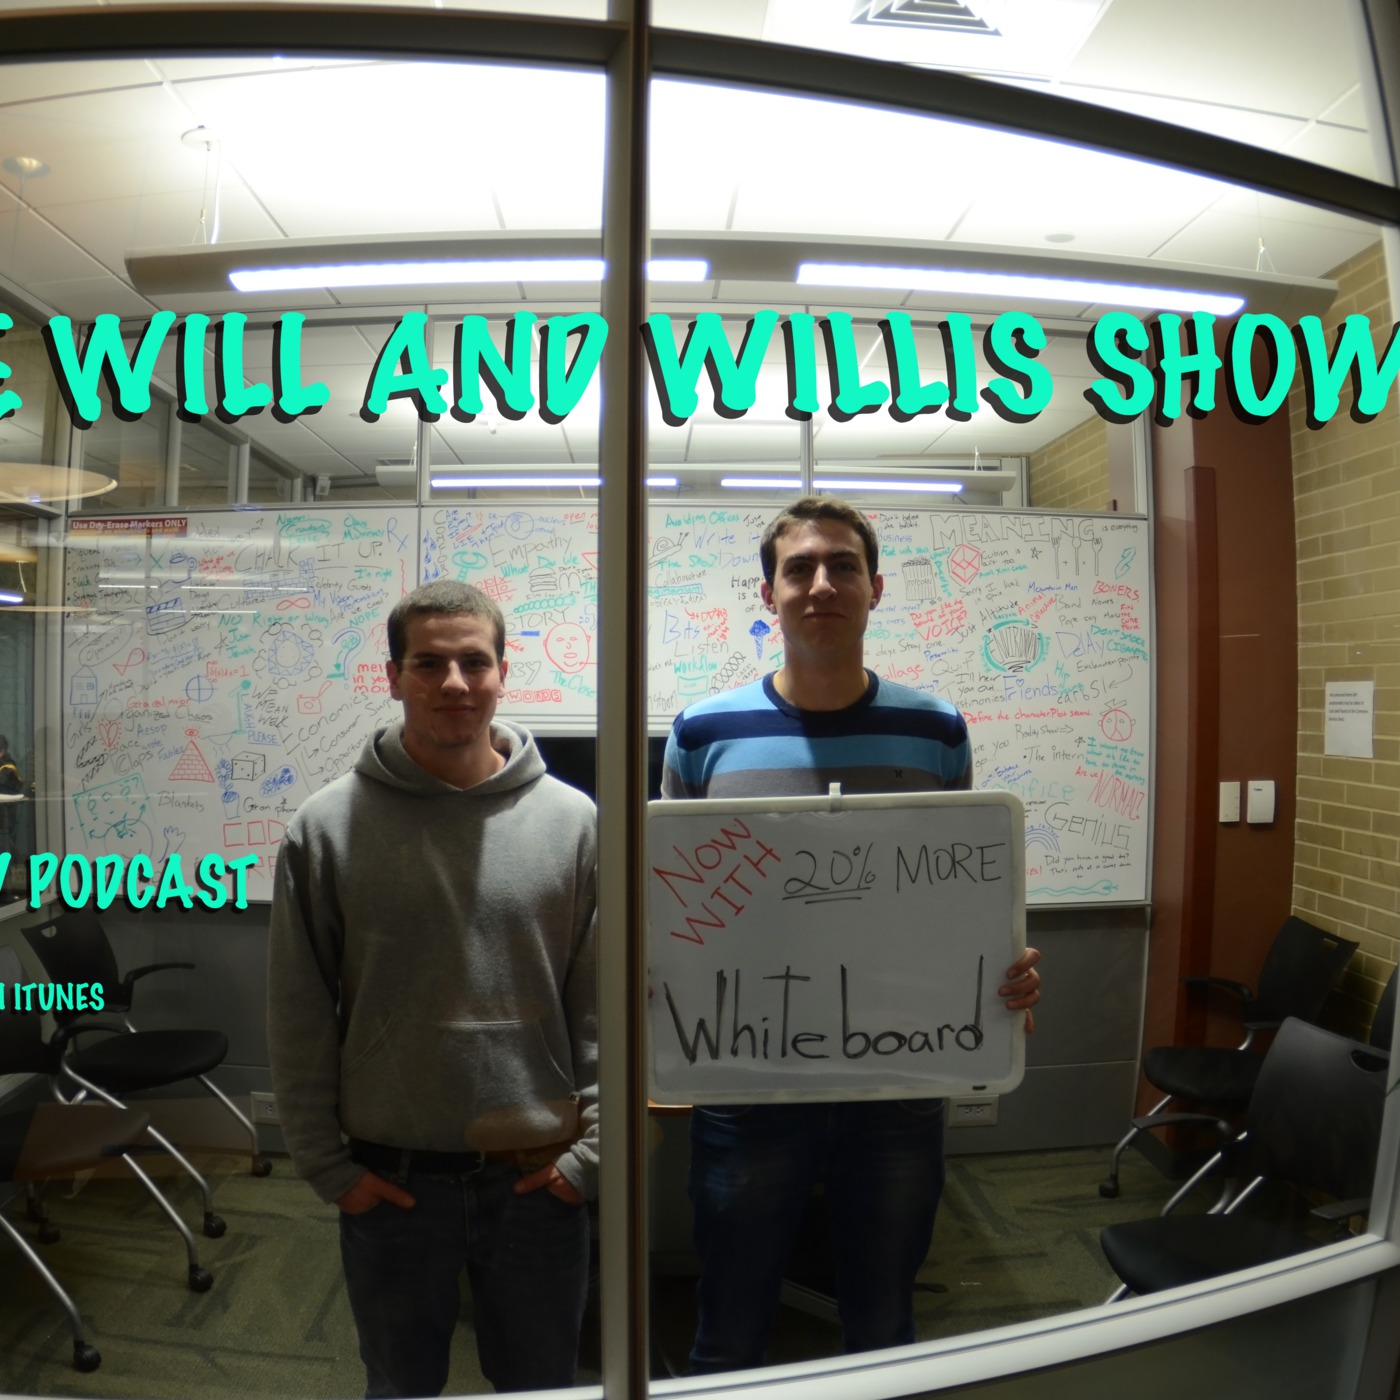 The Will and Willis Show